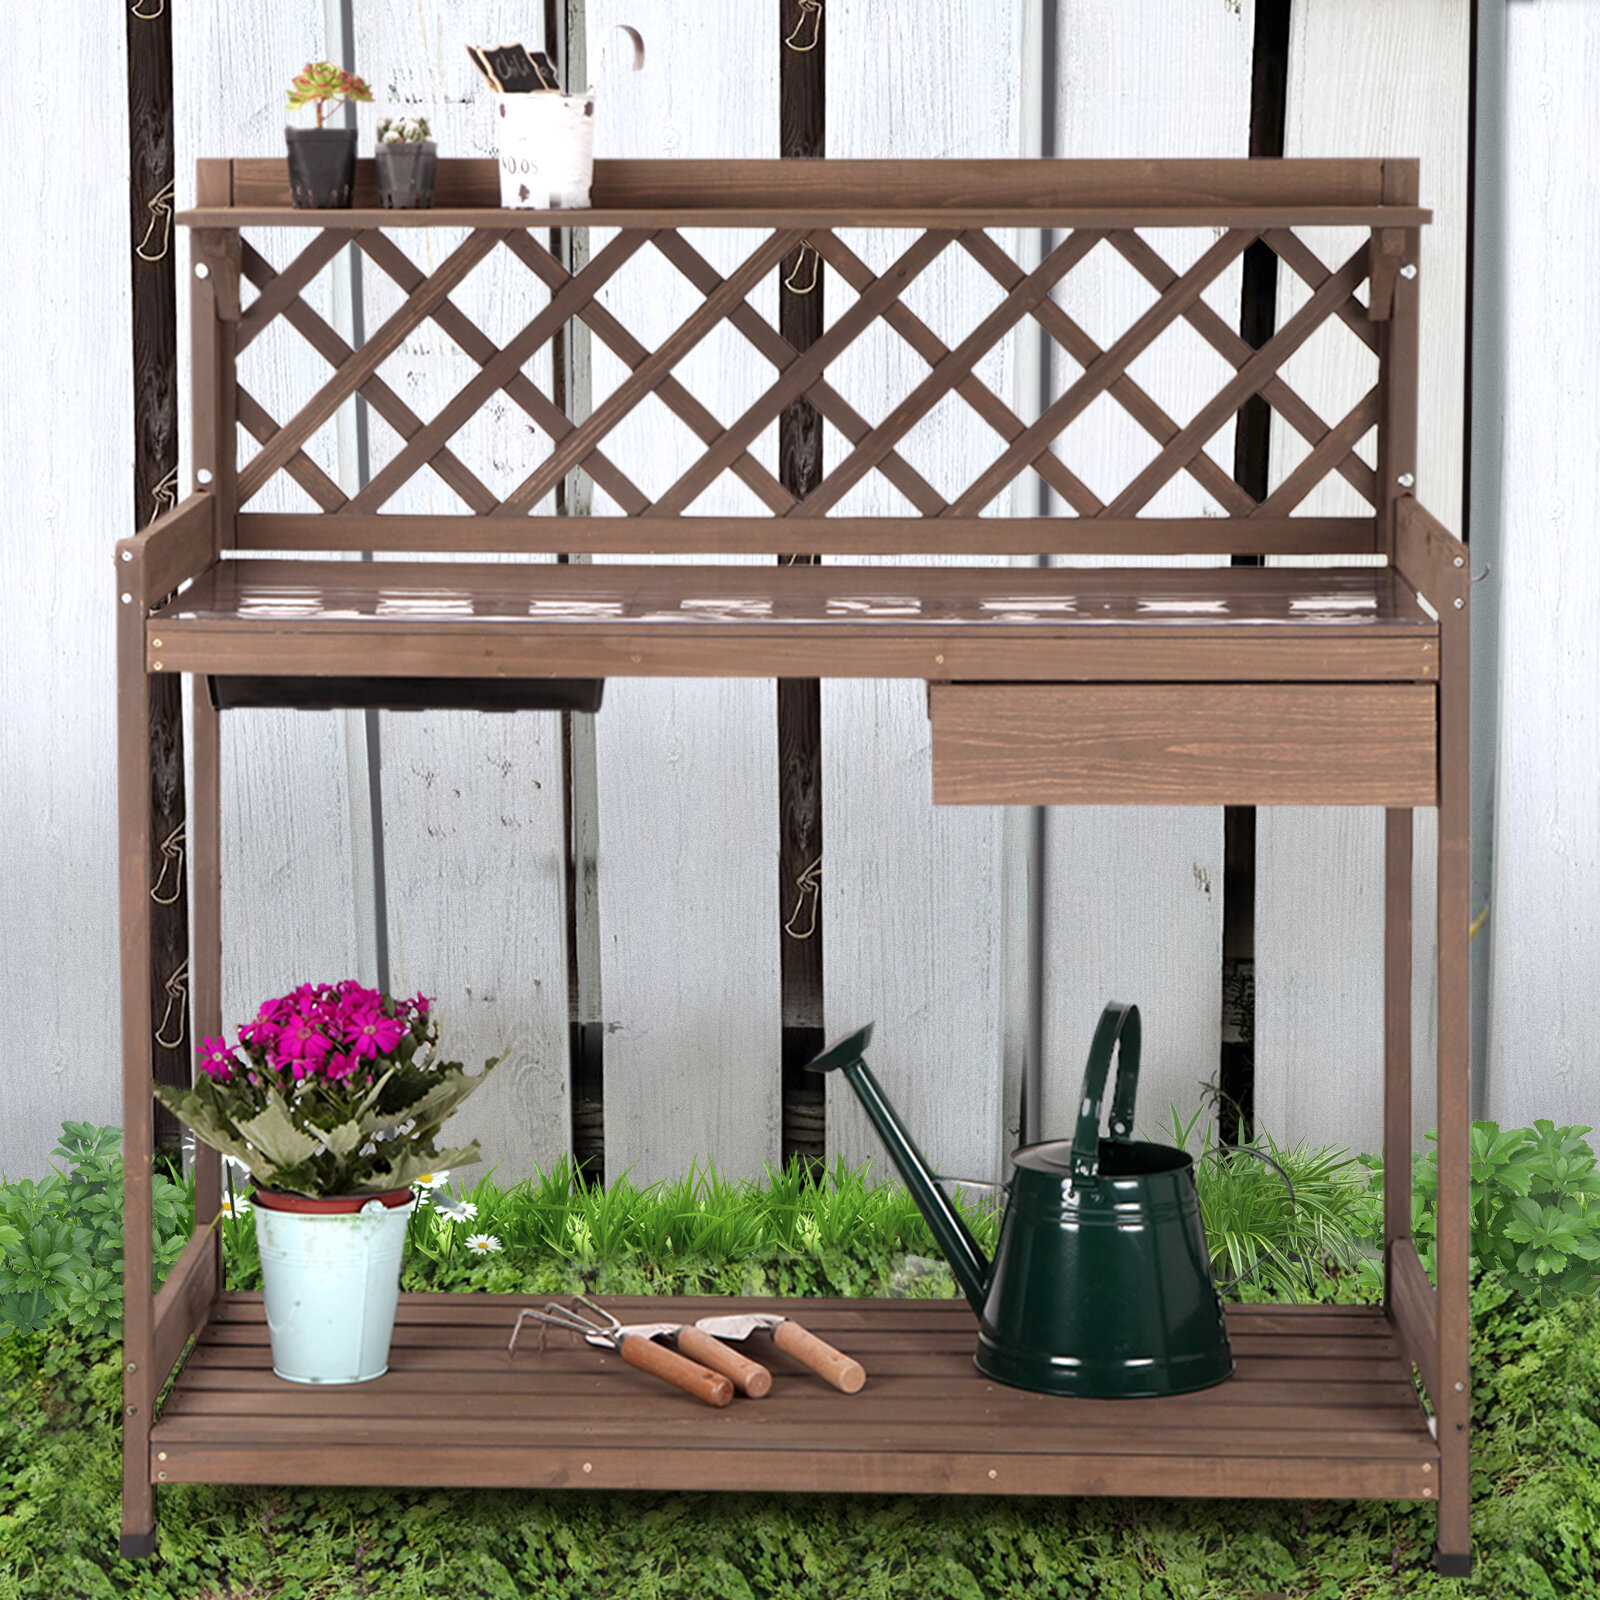 Outdoor Potting Table Bench Garden Planting Wood Shelves Work Station with Hook 